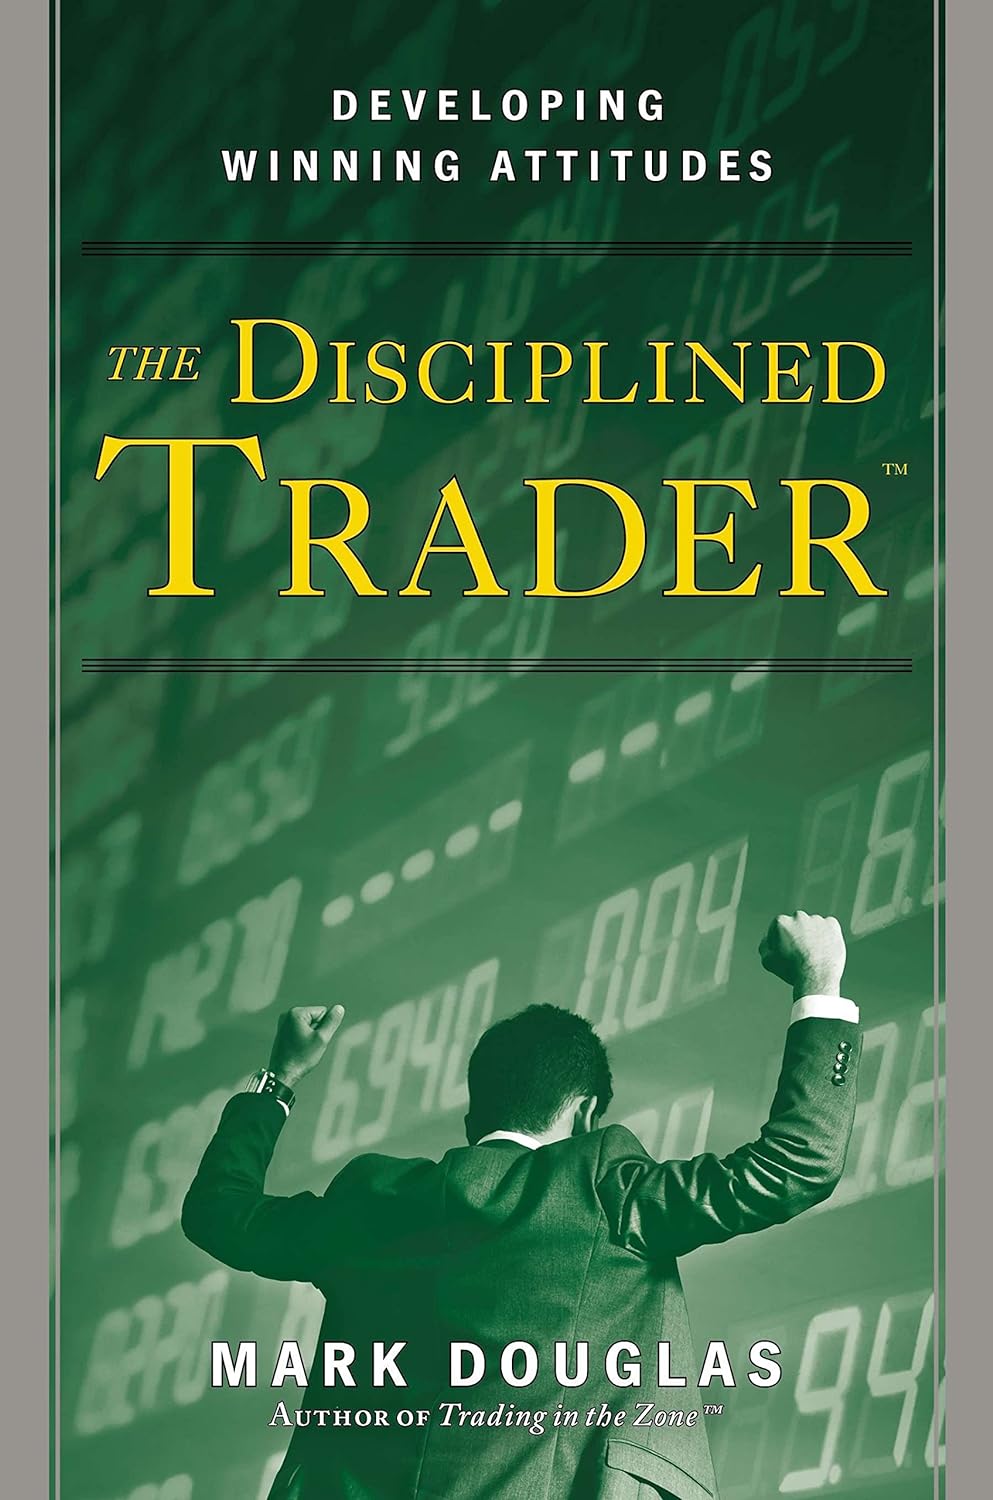 THE DISCIPLINED TRADER By MARK DOUGLAS